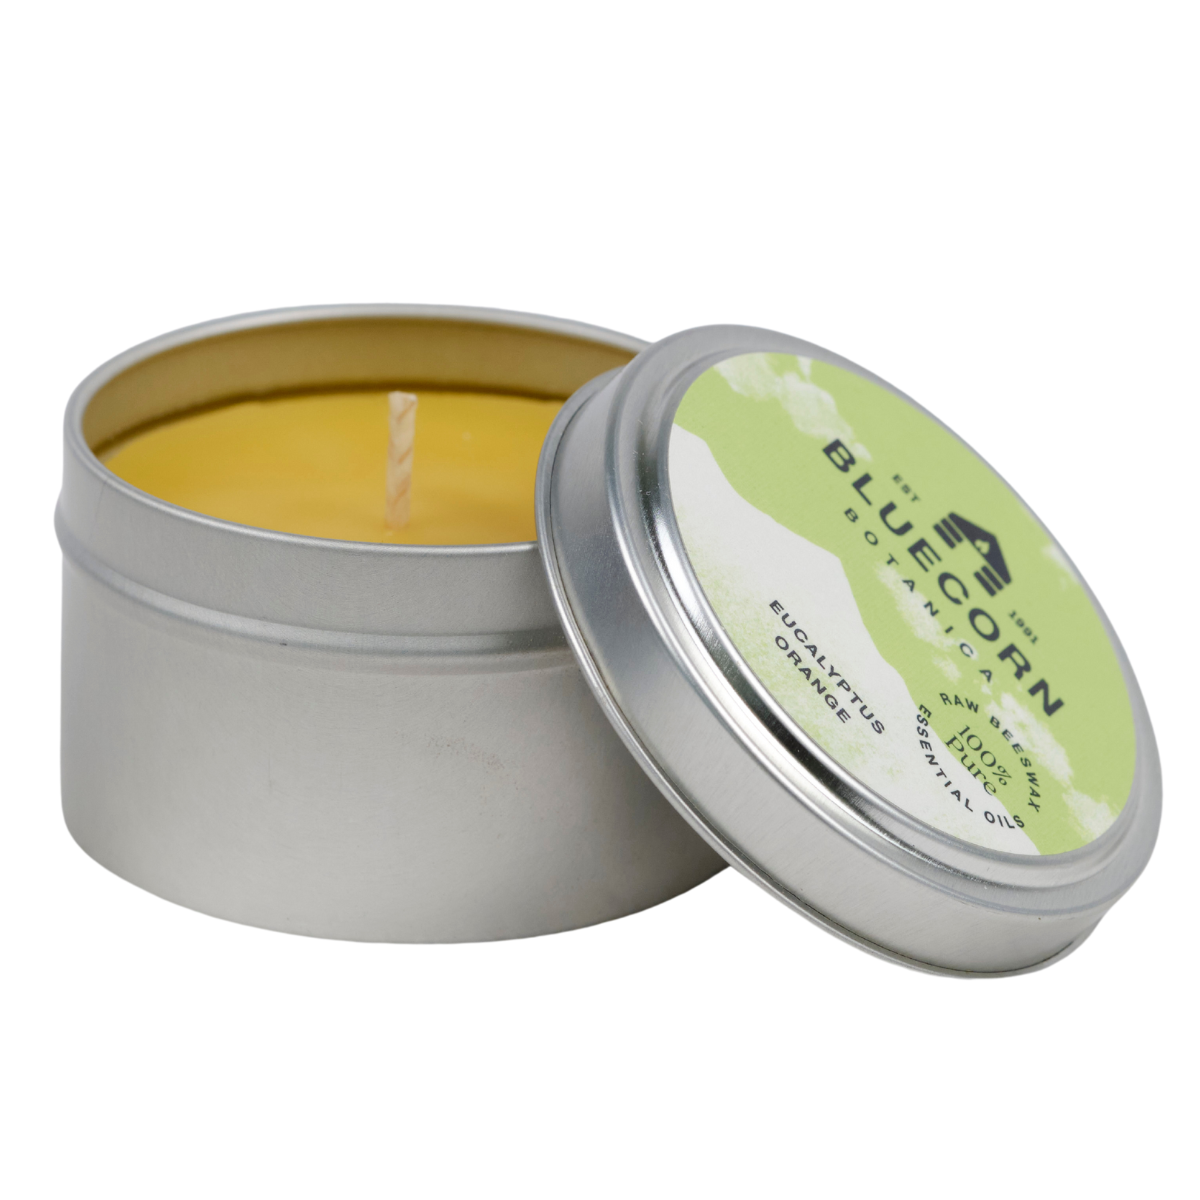 Botanica Beeswax Scented Candles | Travel Tin 2 oz